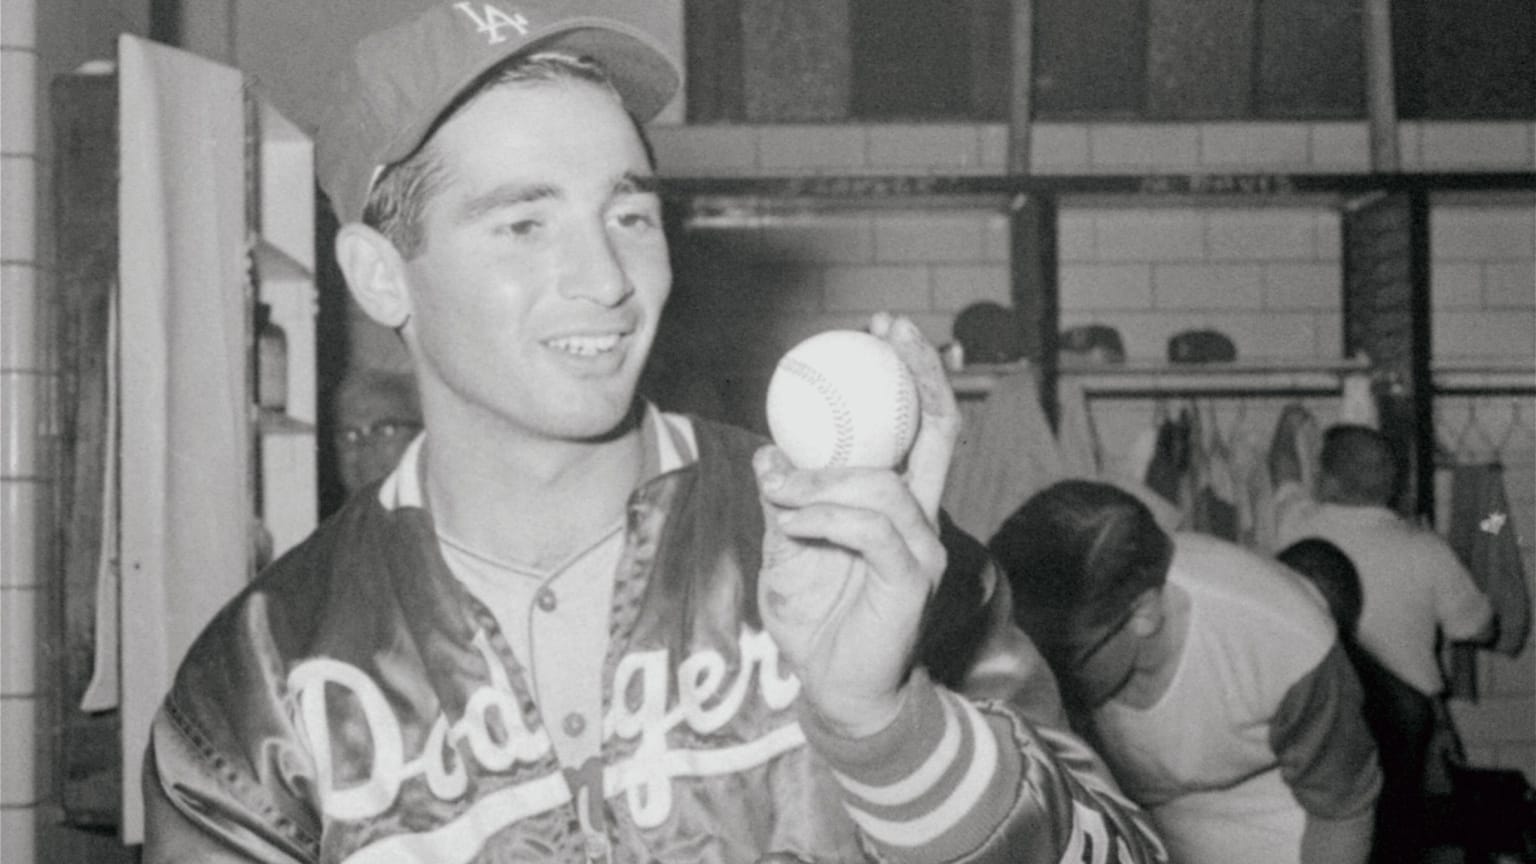 Sandy Koufax holds up a baseball in the Dodgers clubhouse